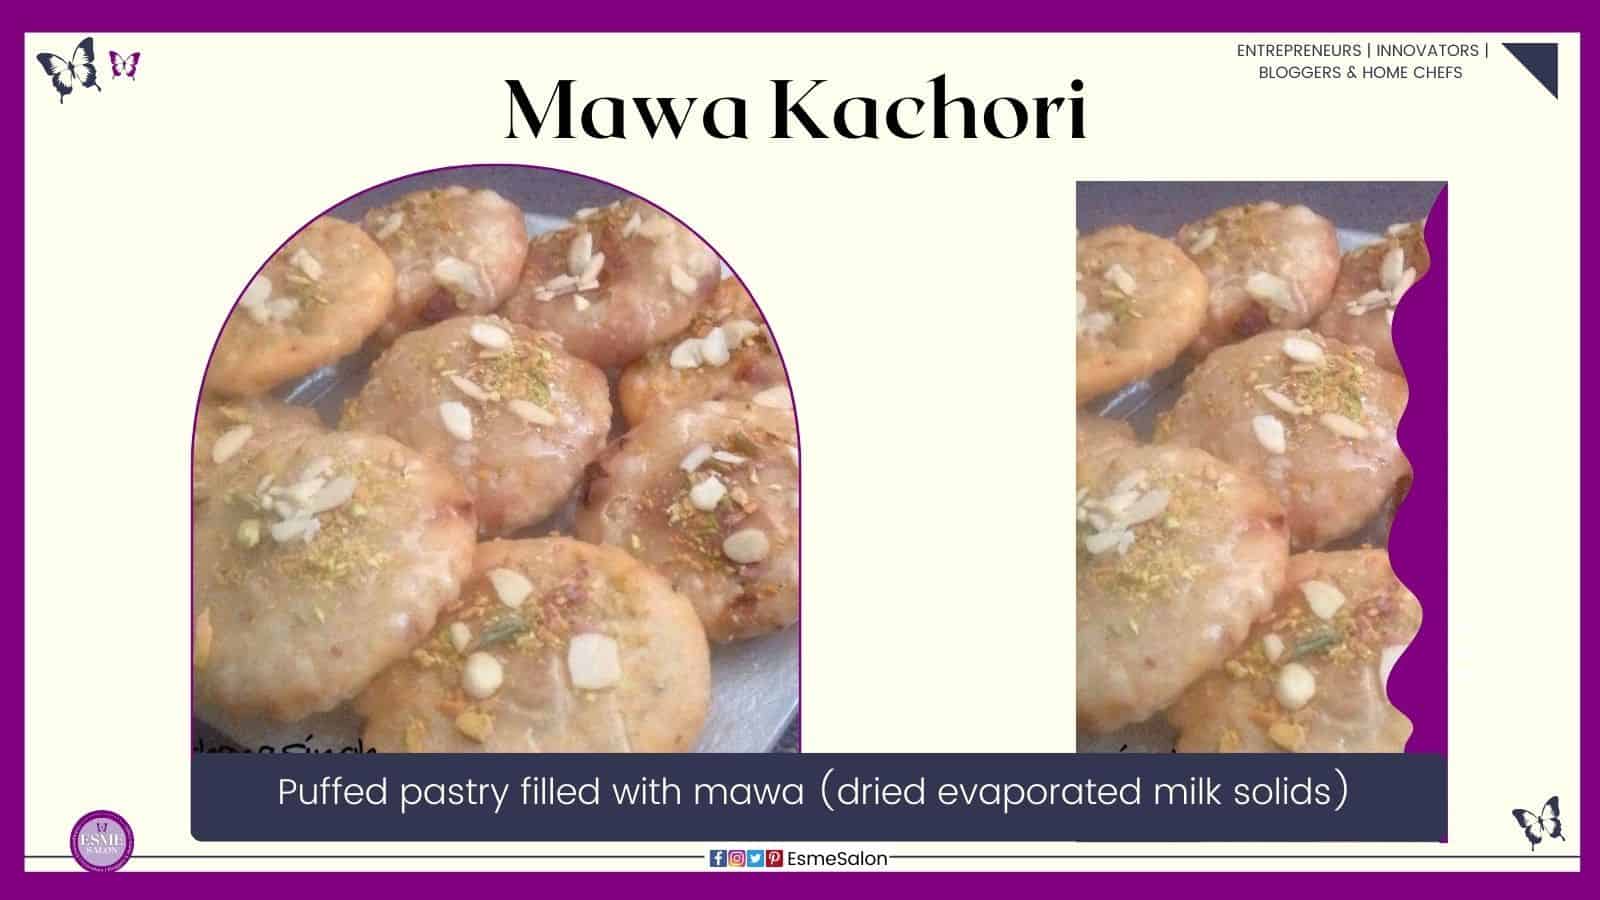 an image of Mawa Kachori, puffed pastry filled with dried evaporated milk solids